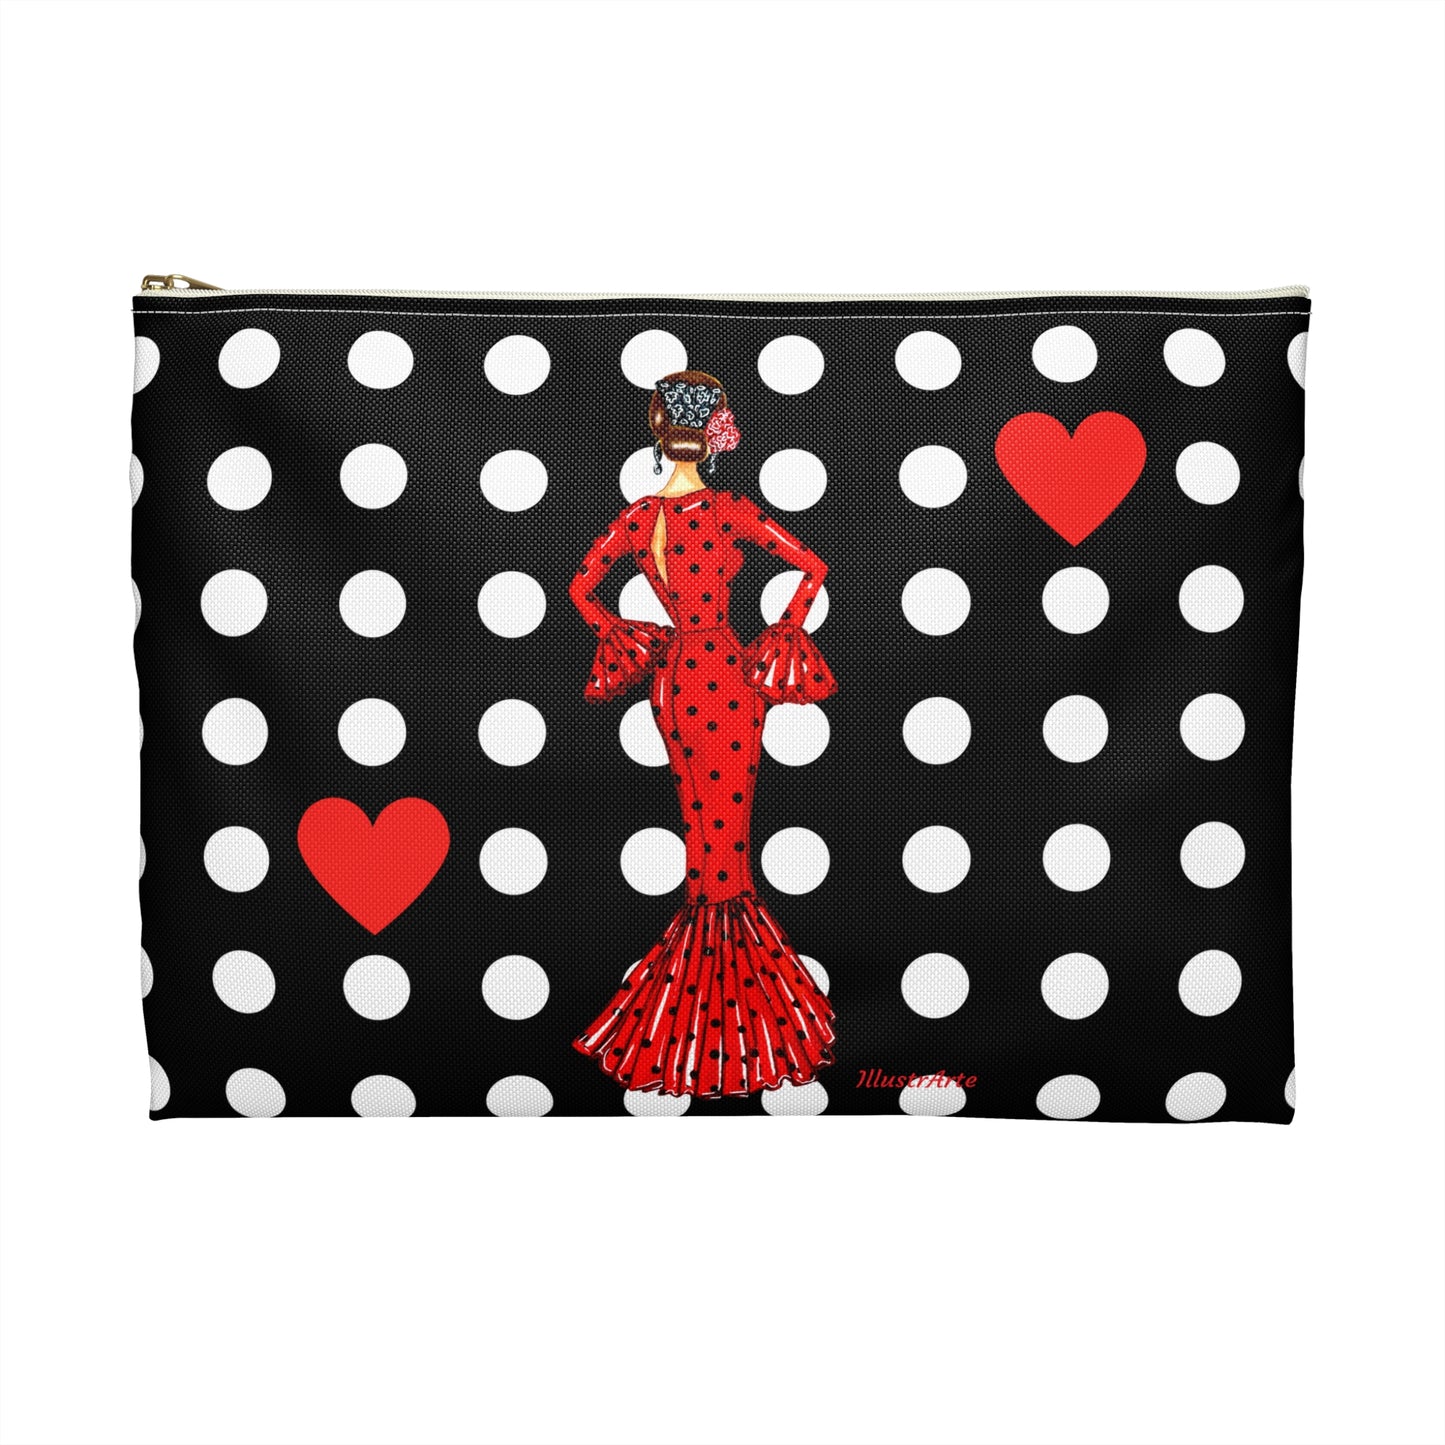 a black and white polka dot purse with a lady in a red dress